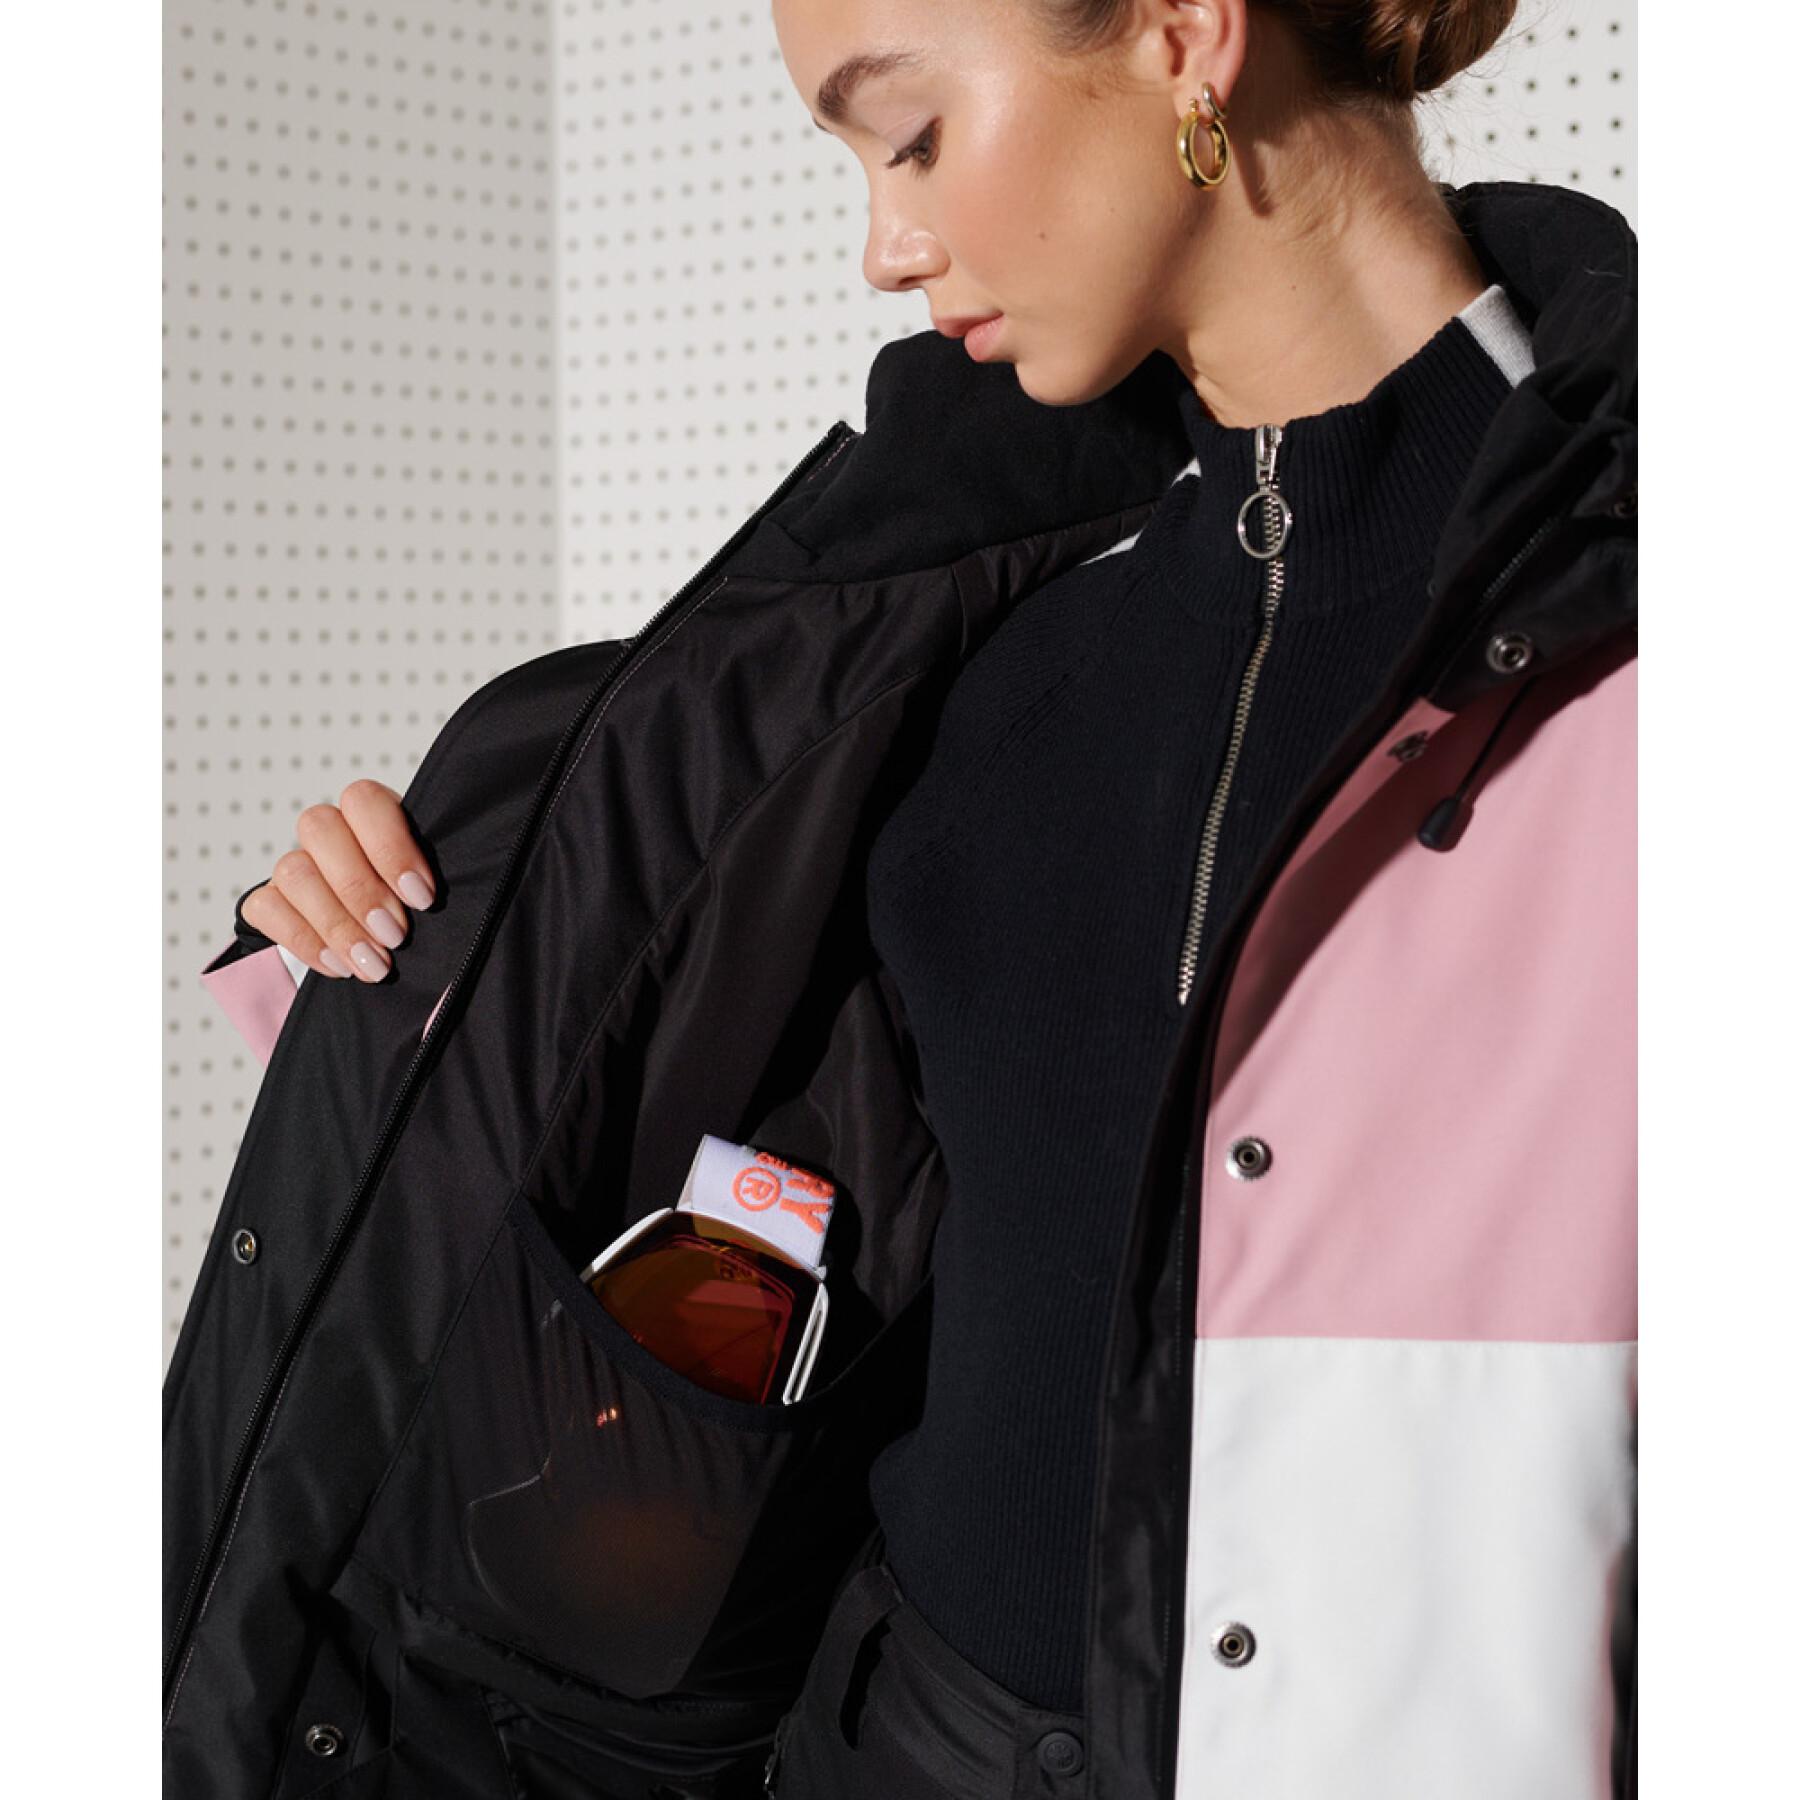 Jaqueta de mulher Superdry Freestyle Attack